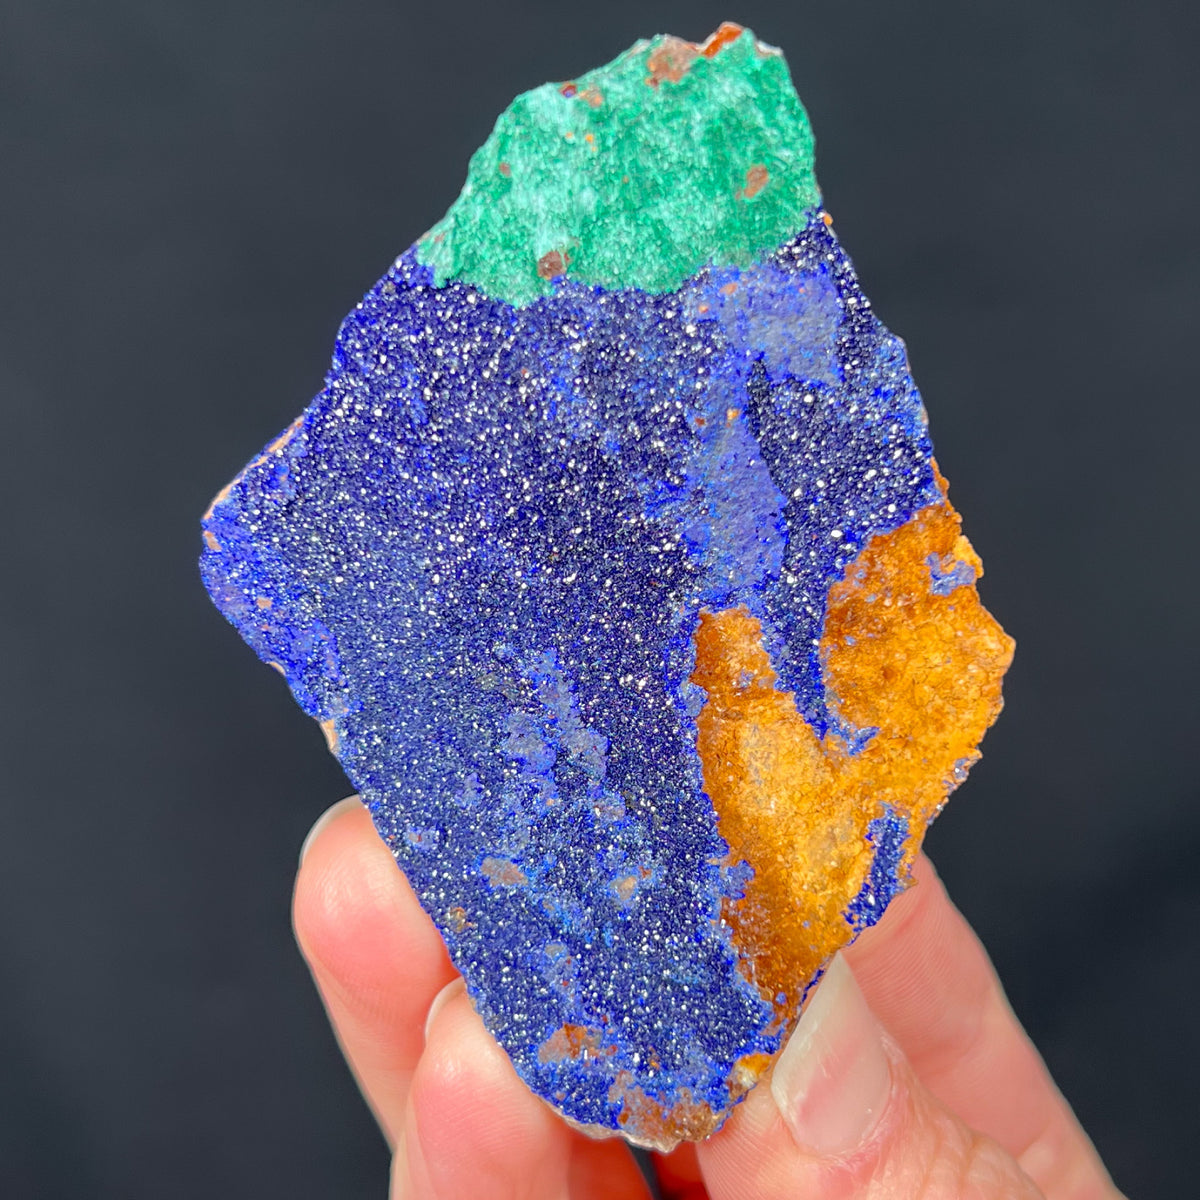 Drusy Azurite Crystals with Fibrous Malachite